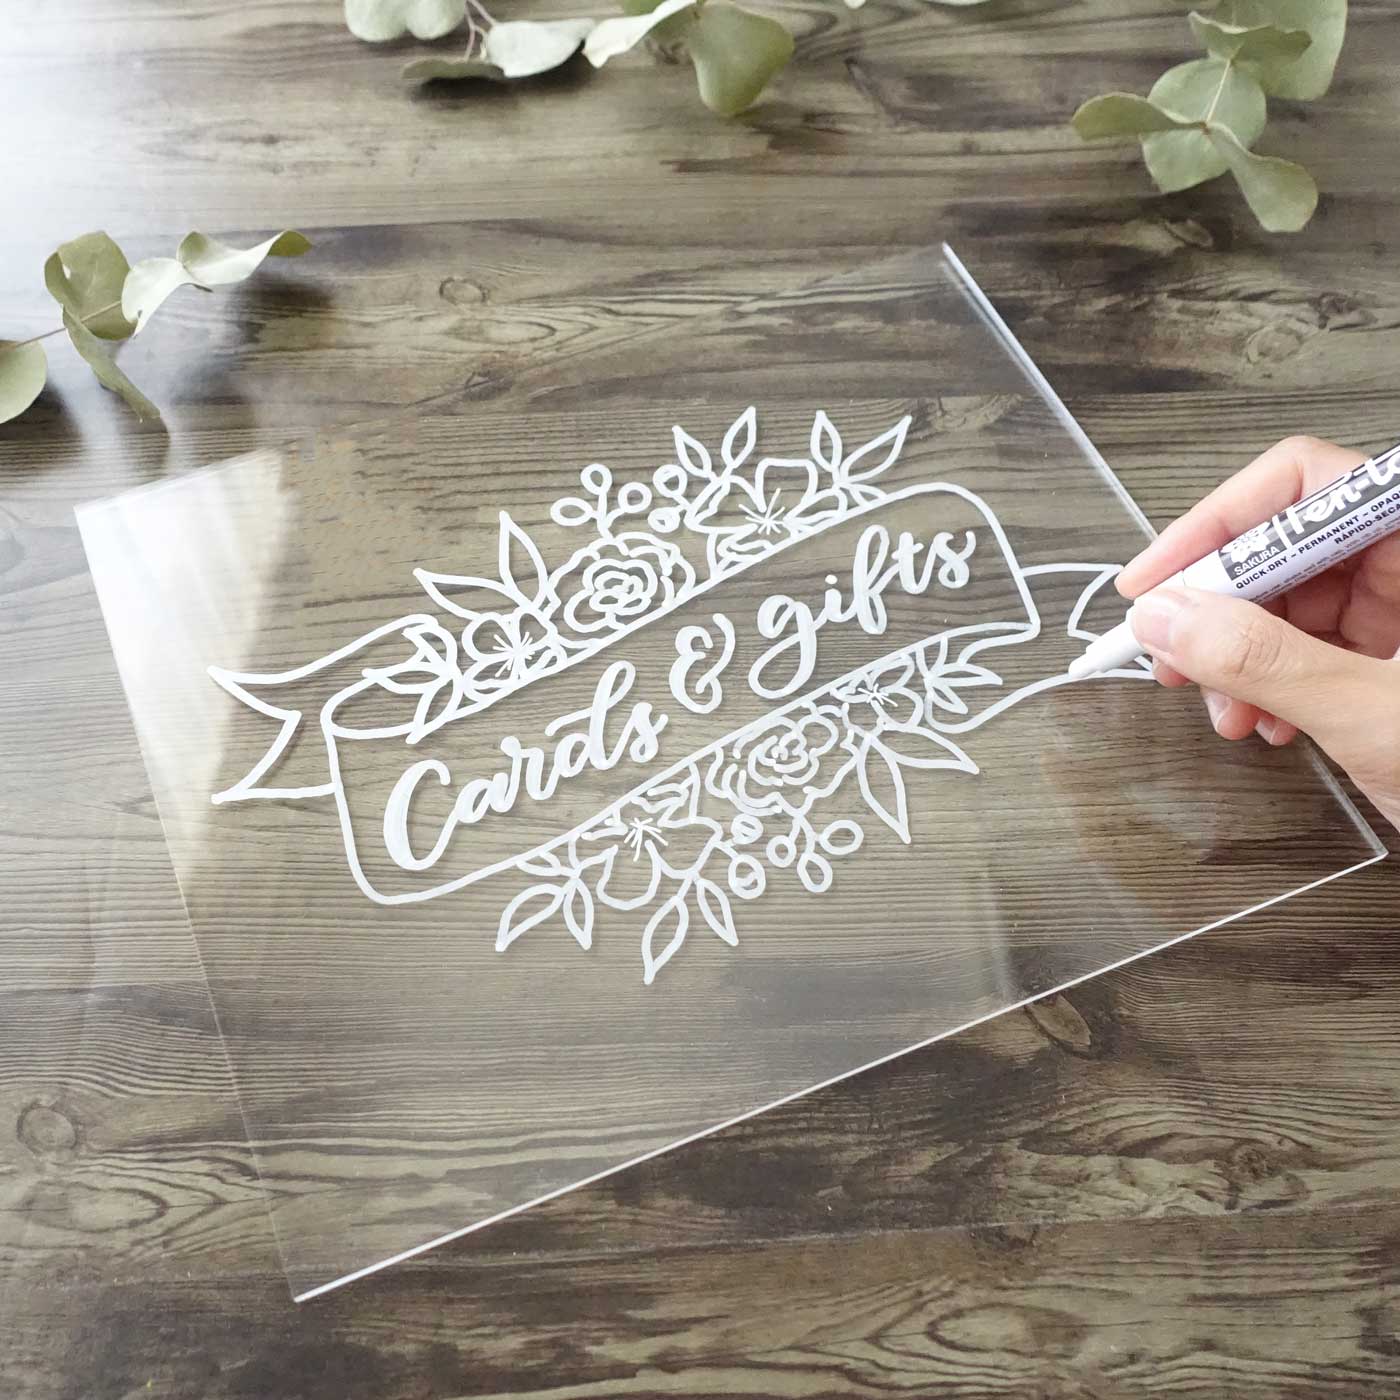 DIY acrylic wedding table sign for cards and gifts